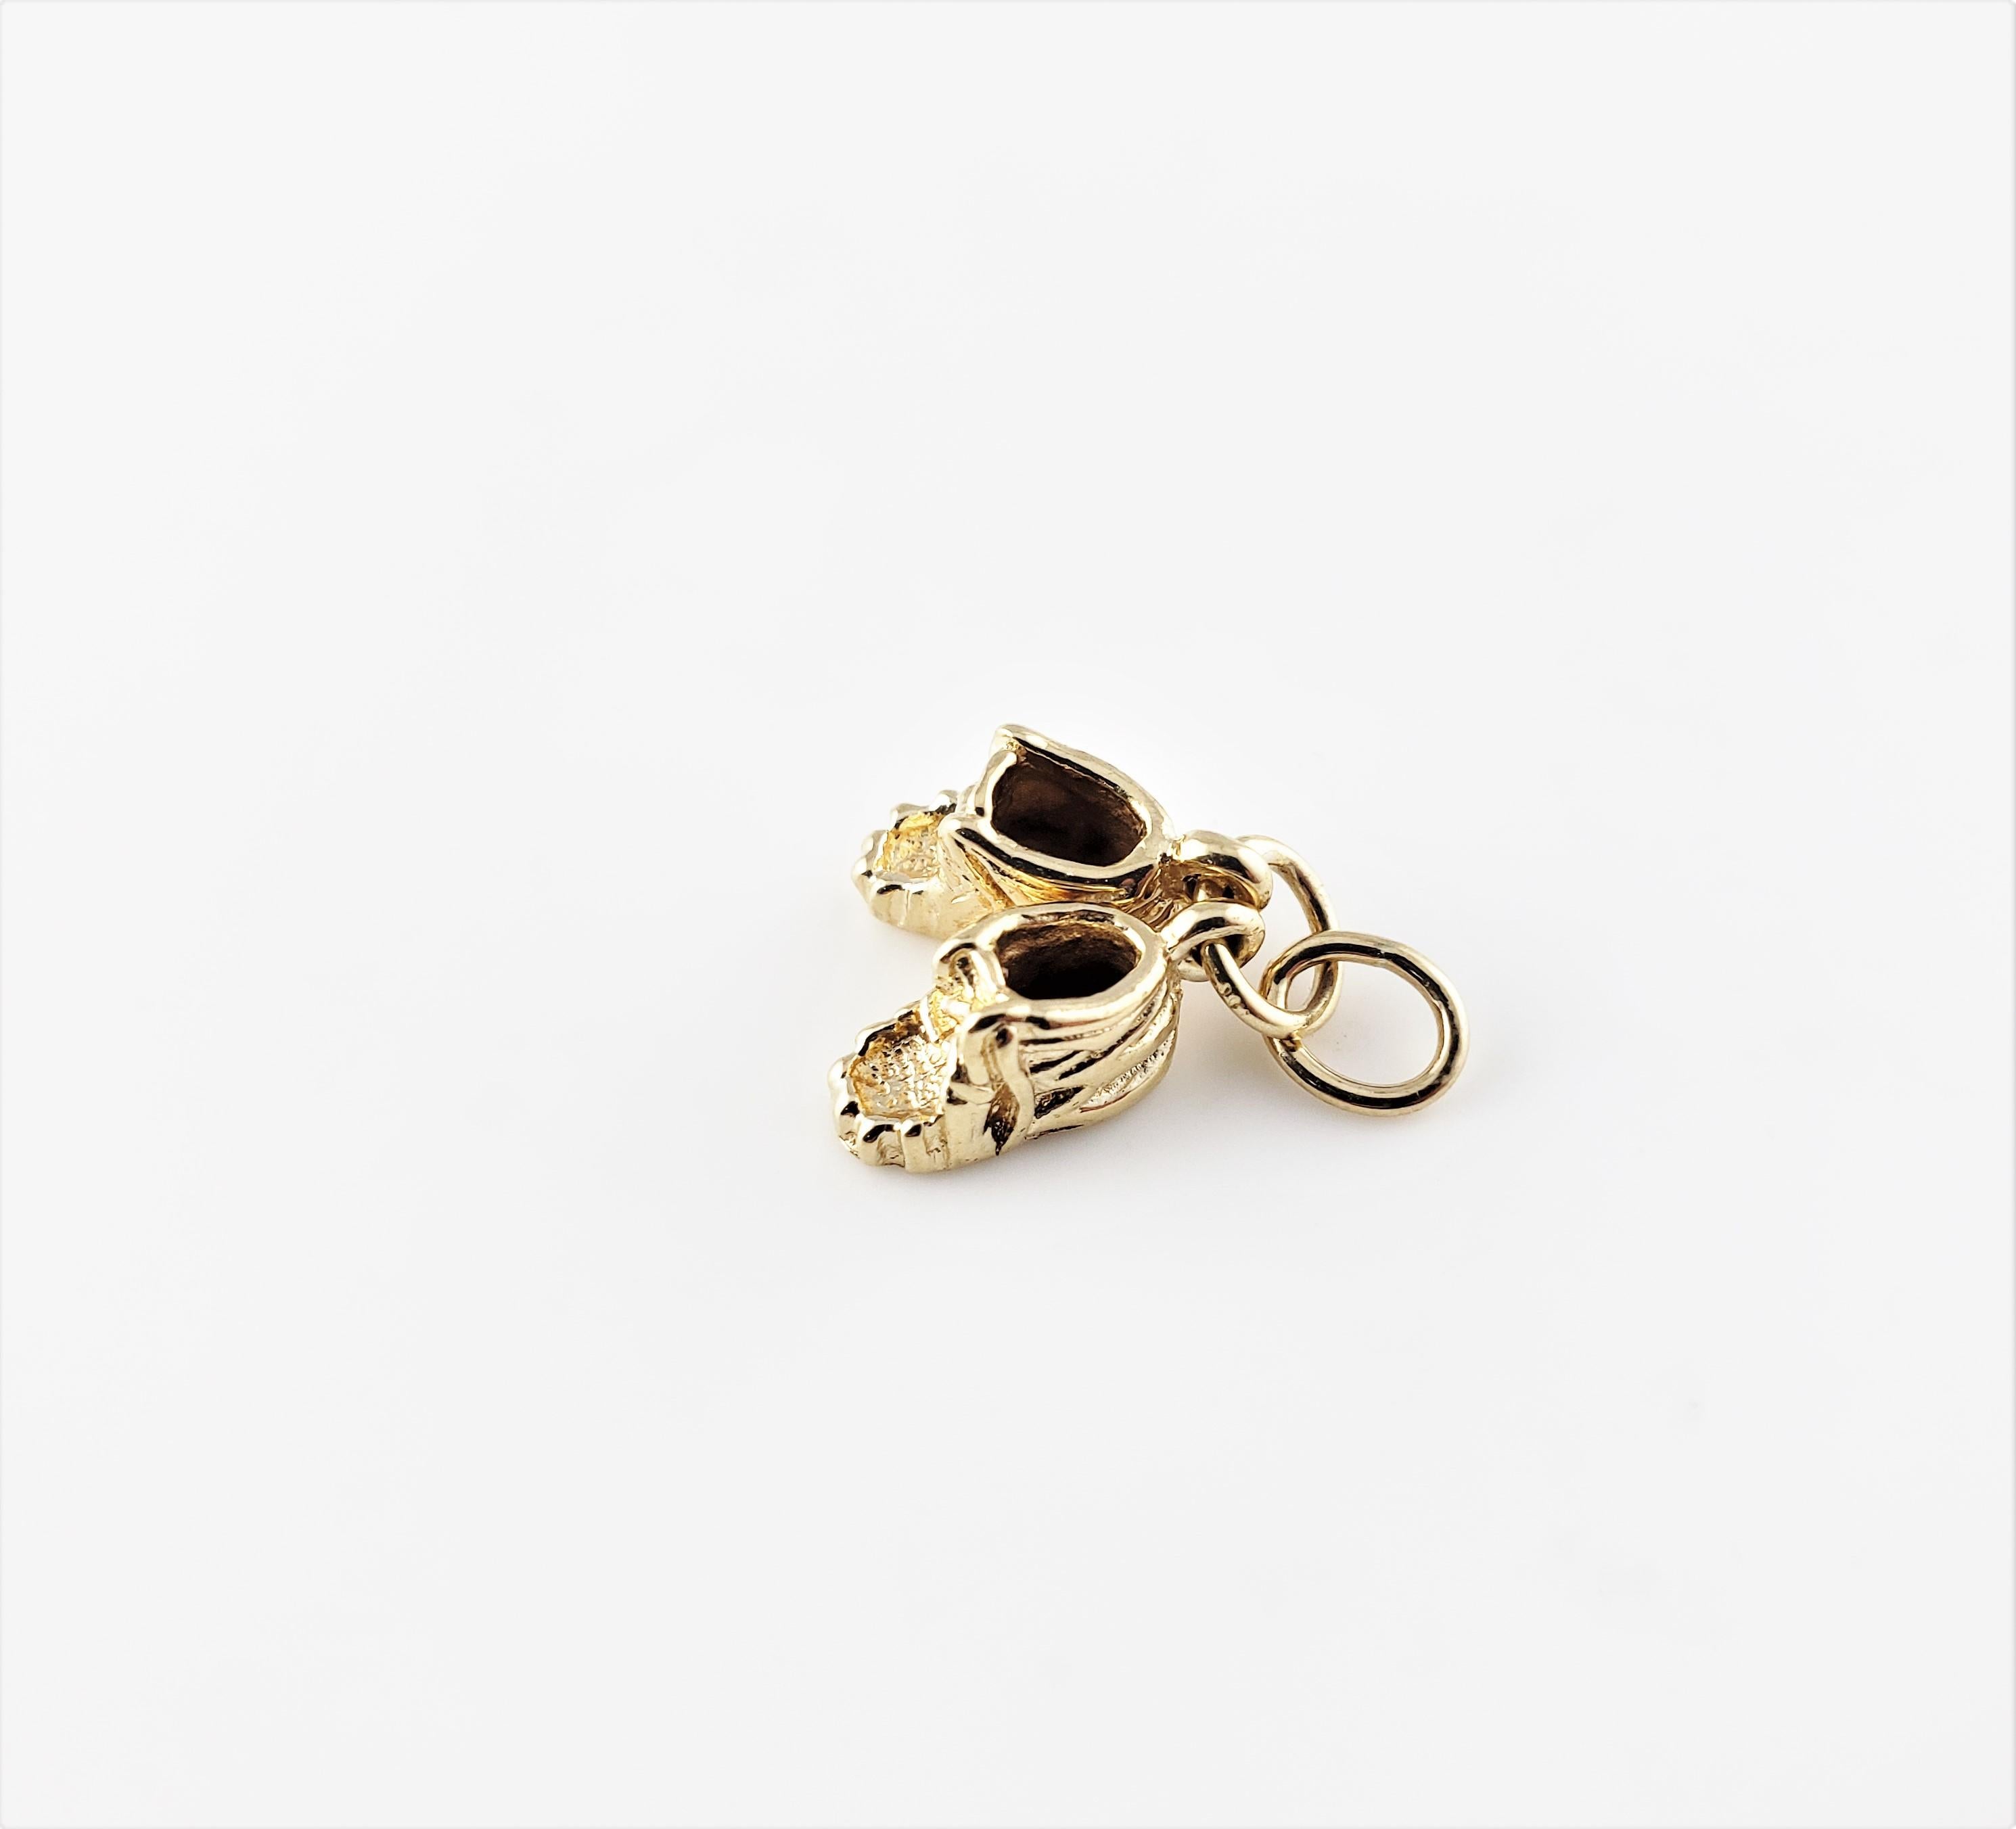 Vintage 14 Karat Yellow Gold Baby Shoes Charm-

Commemorate baby's first steps!

This lovely charm features a pair of baby booties meticulously detailed in 14K yellow gold.

Size: 10 mm x 5 mm (each shoe)

Weight: 1.7 dwt. / 2.7 gr.

Stamped: 14K